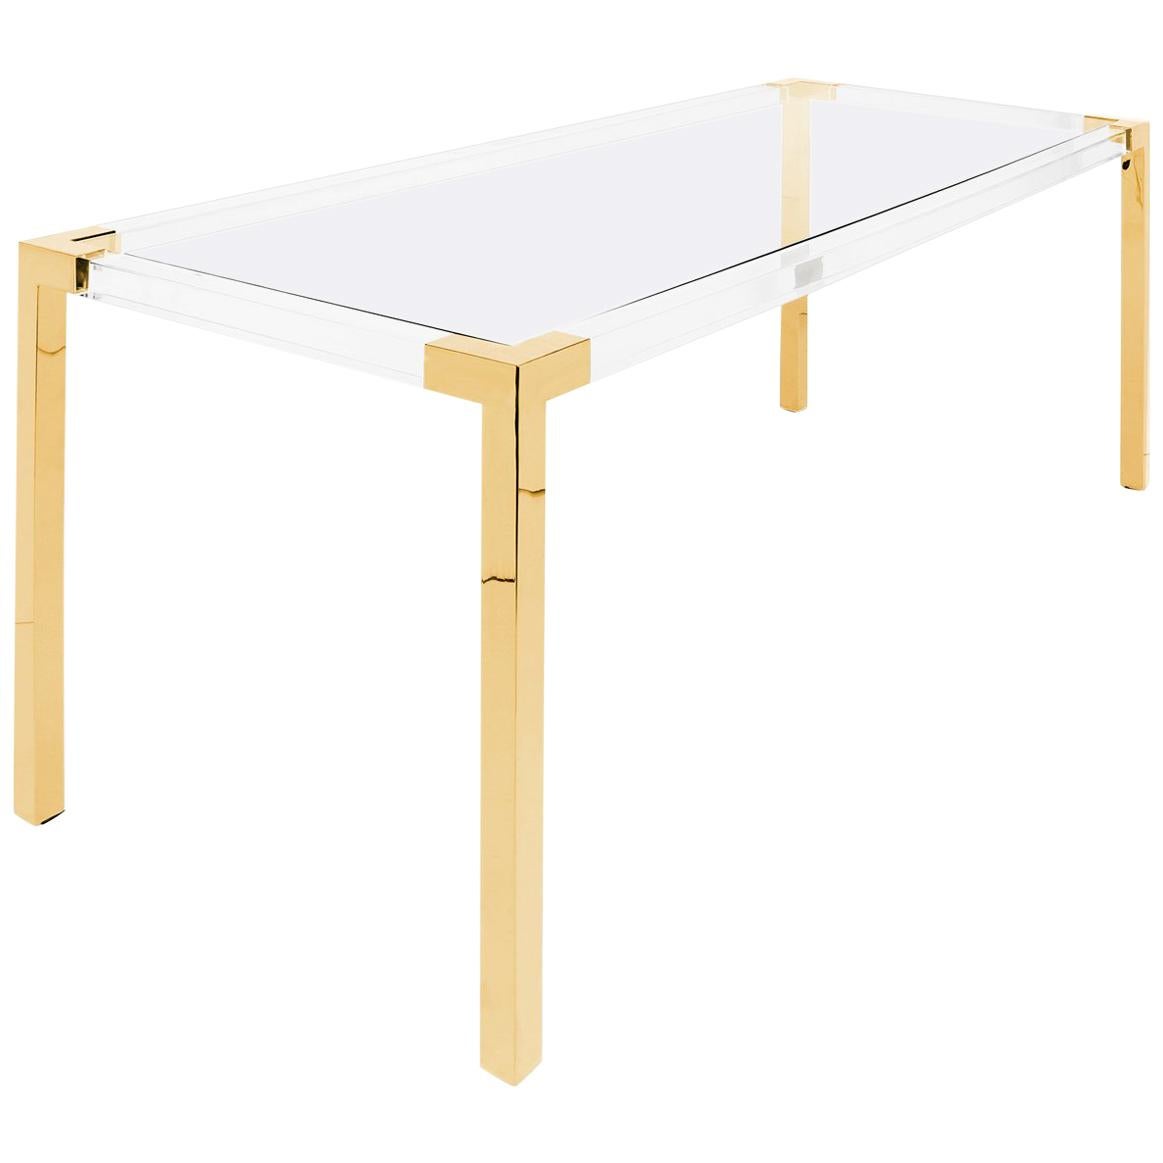 Lucite and Brass Modern Rectangular Dining Table with Glass For Sale